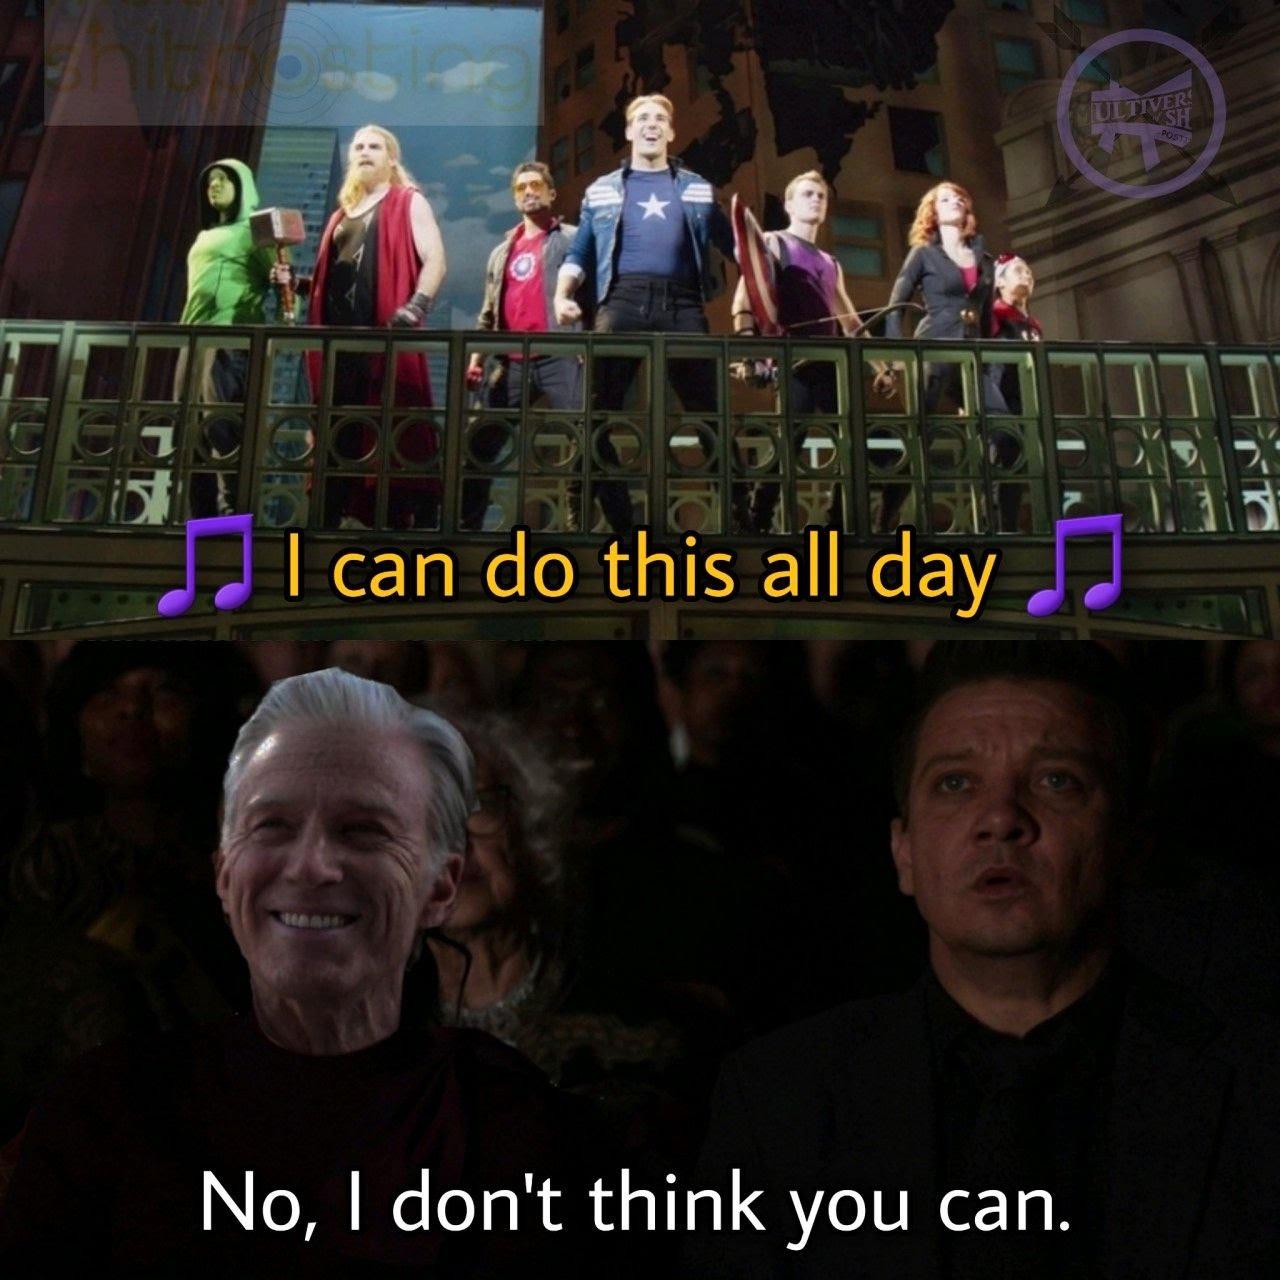 hawkeye memes - Cultiver Post I can do this all day No, I don't think you can.